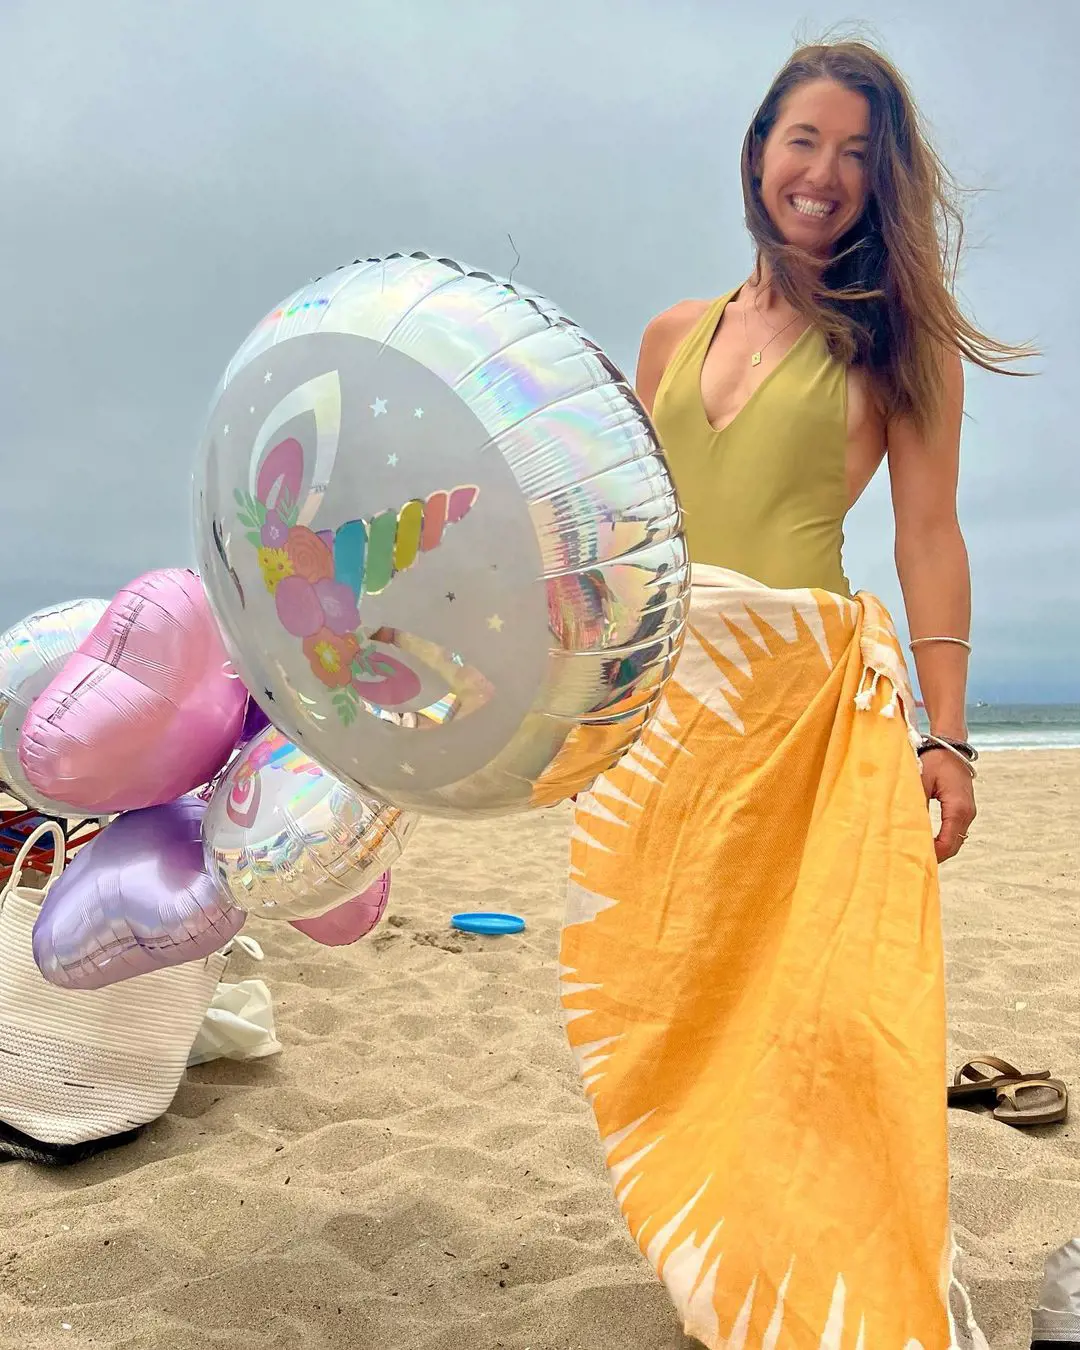 Shallow and her daughter at beach birthday party in July 2022